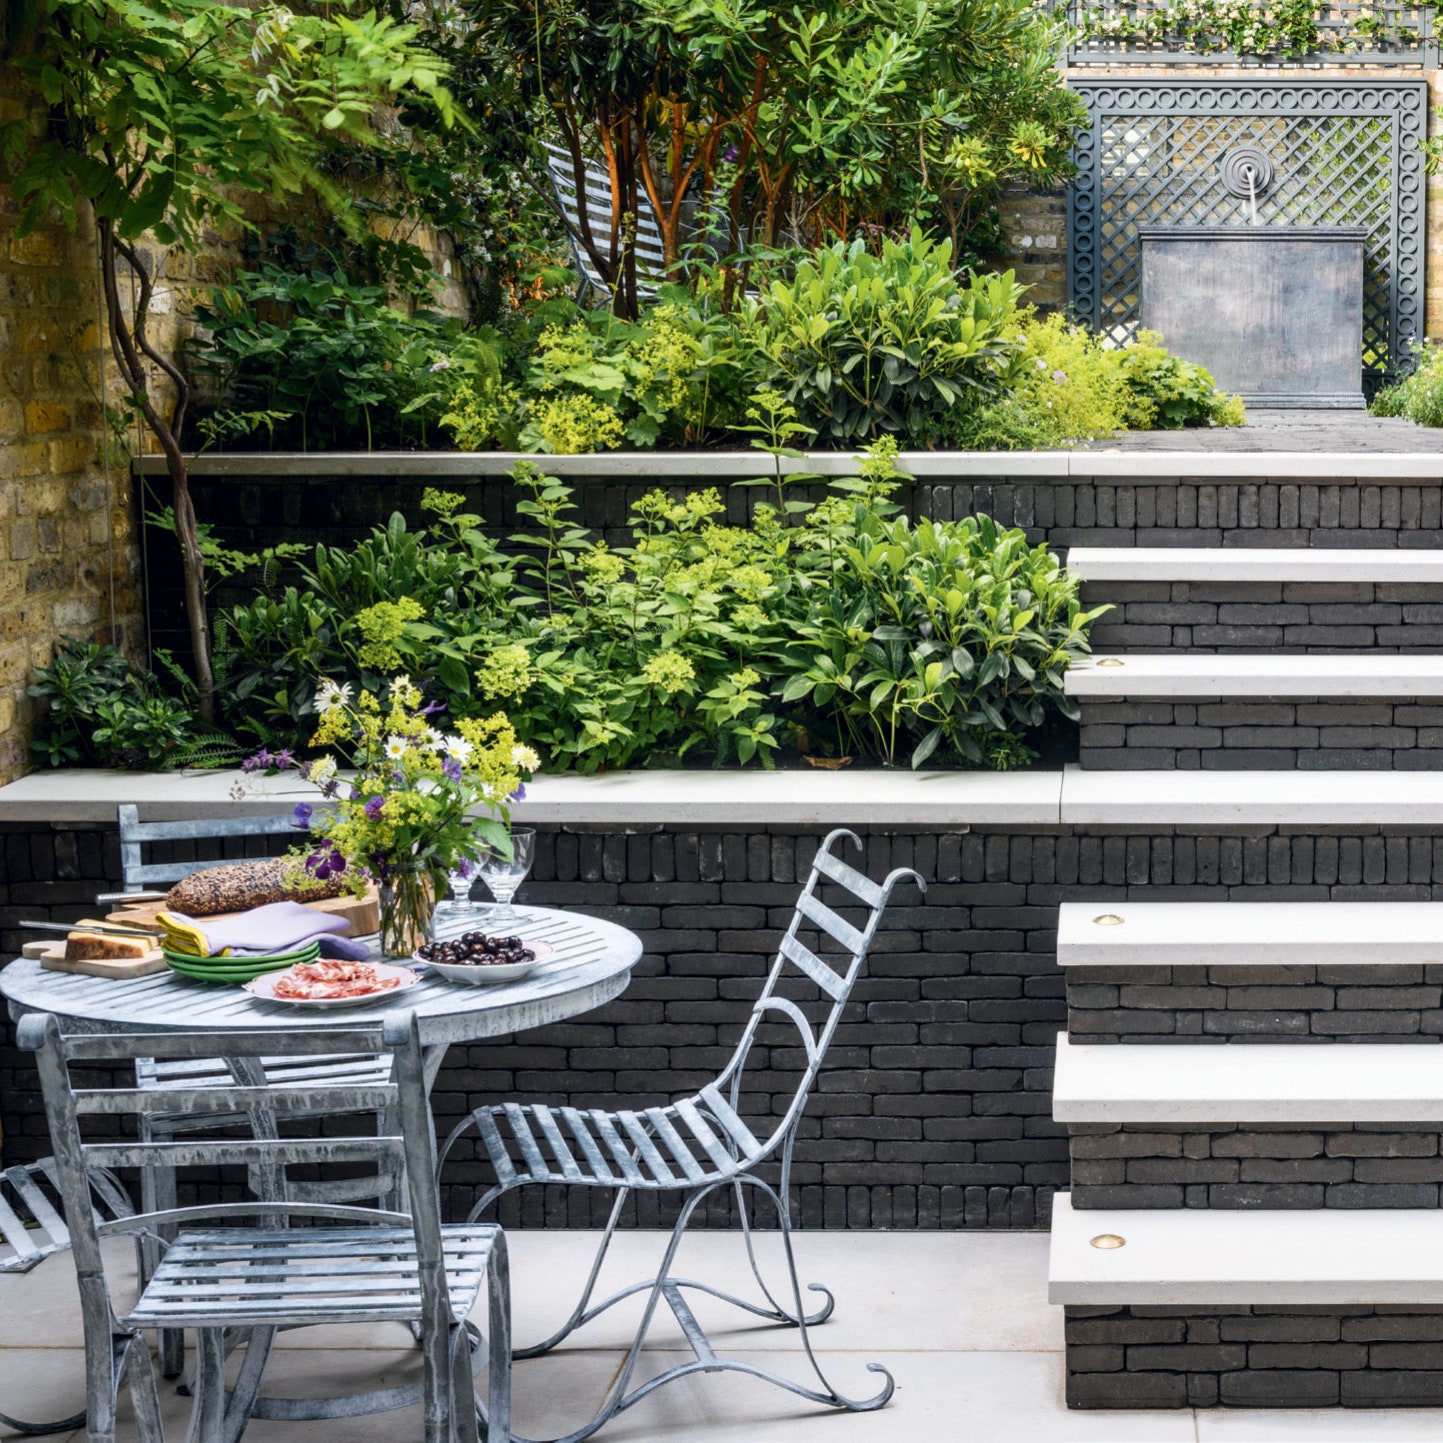 Butter Wakefield's clever design ideas for a small city garden